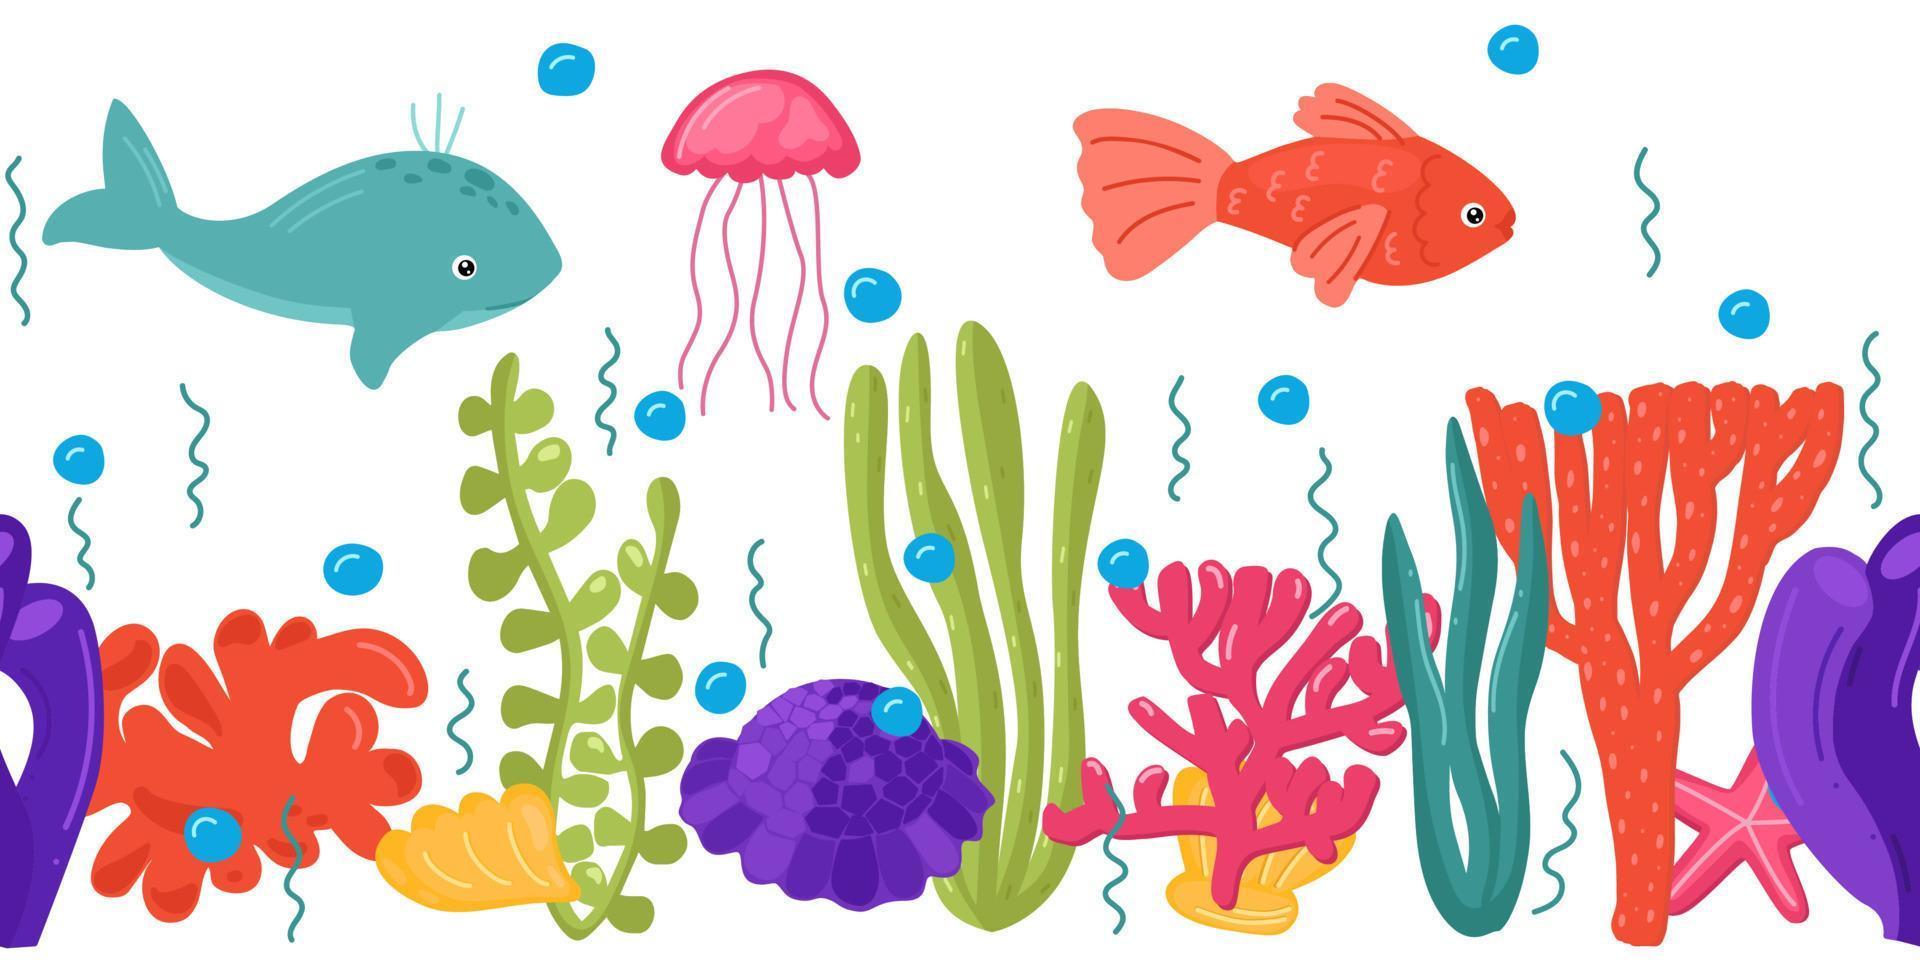 Vector illustration of seaweeds and sea animals. Underwater life seamless boarder. Isolated Marine Life on white background.